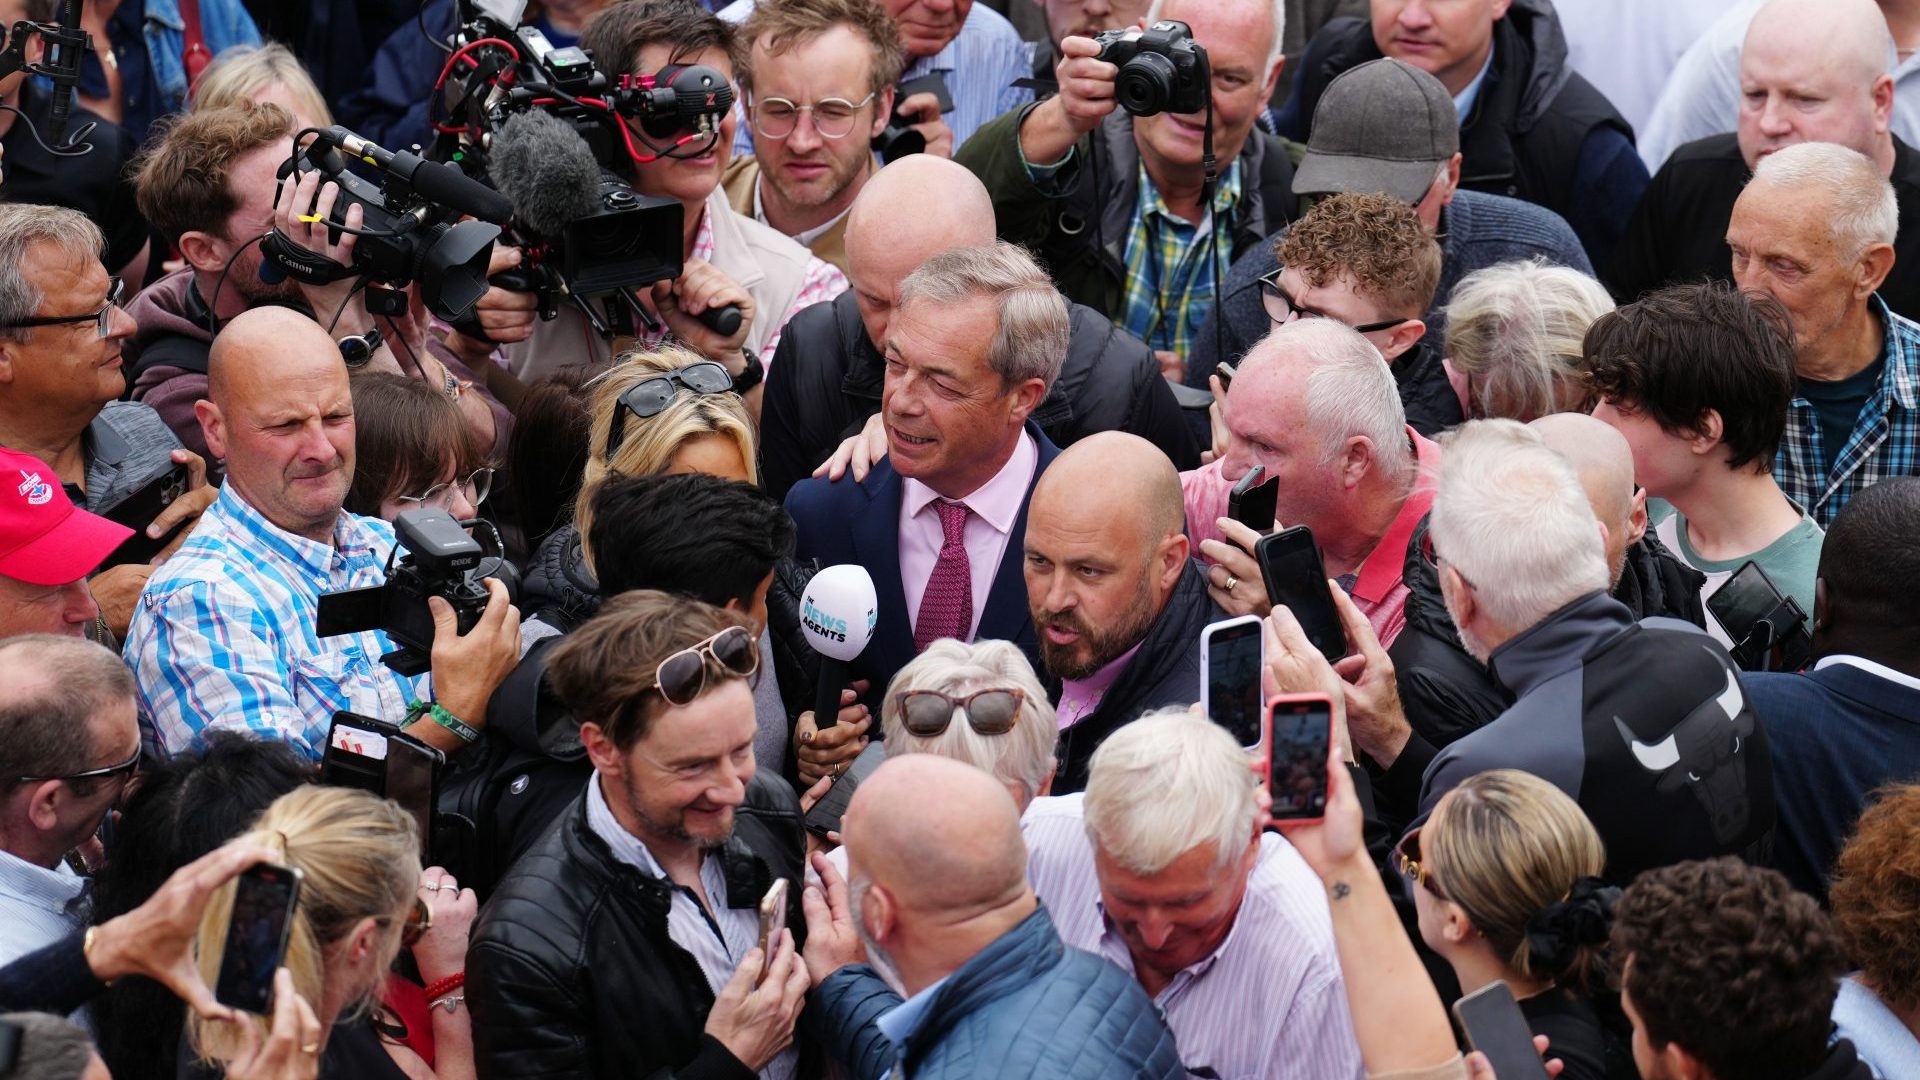 Nigel Farage greets supporters as he launches his election candidacy at Clacton Pier (Photo by Carl Court/Getty Images)